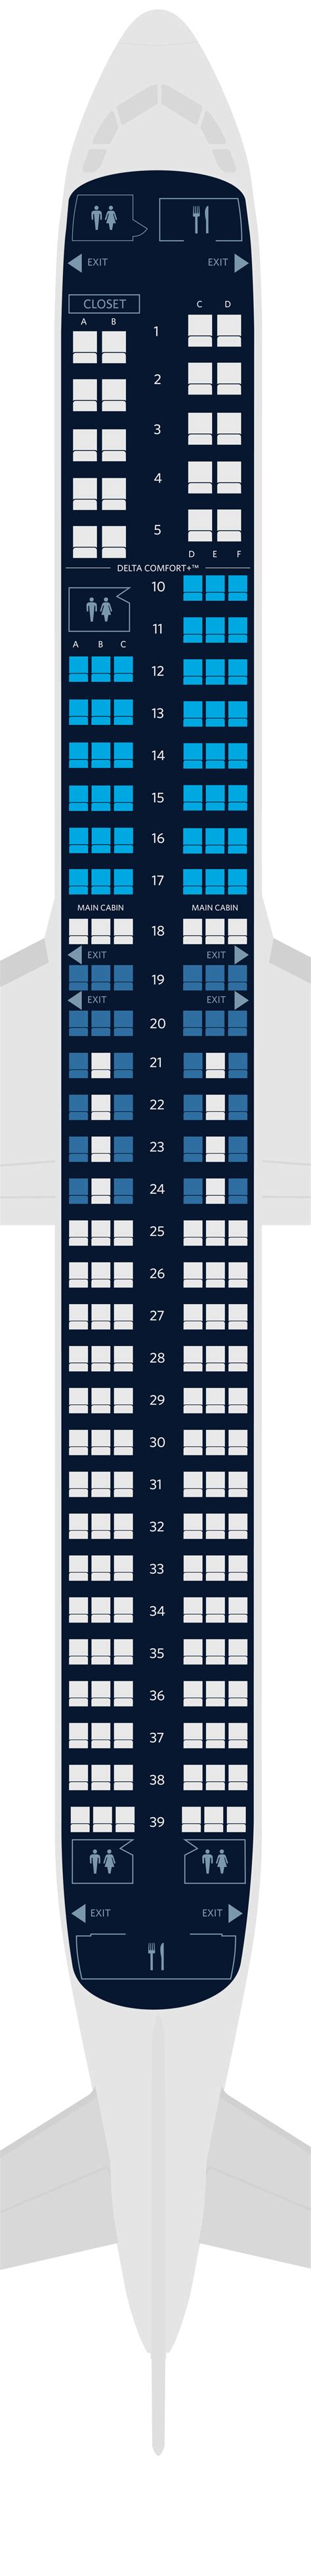 Airbus A321neo Seat Maps Specs And Amenities Delta Air Lines